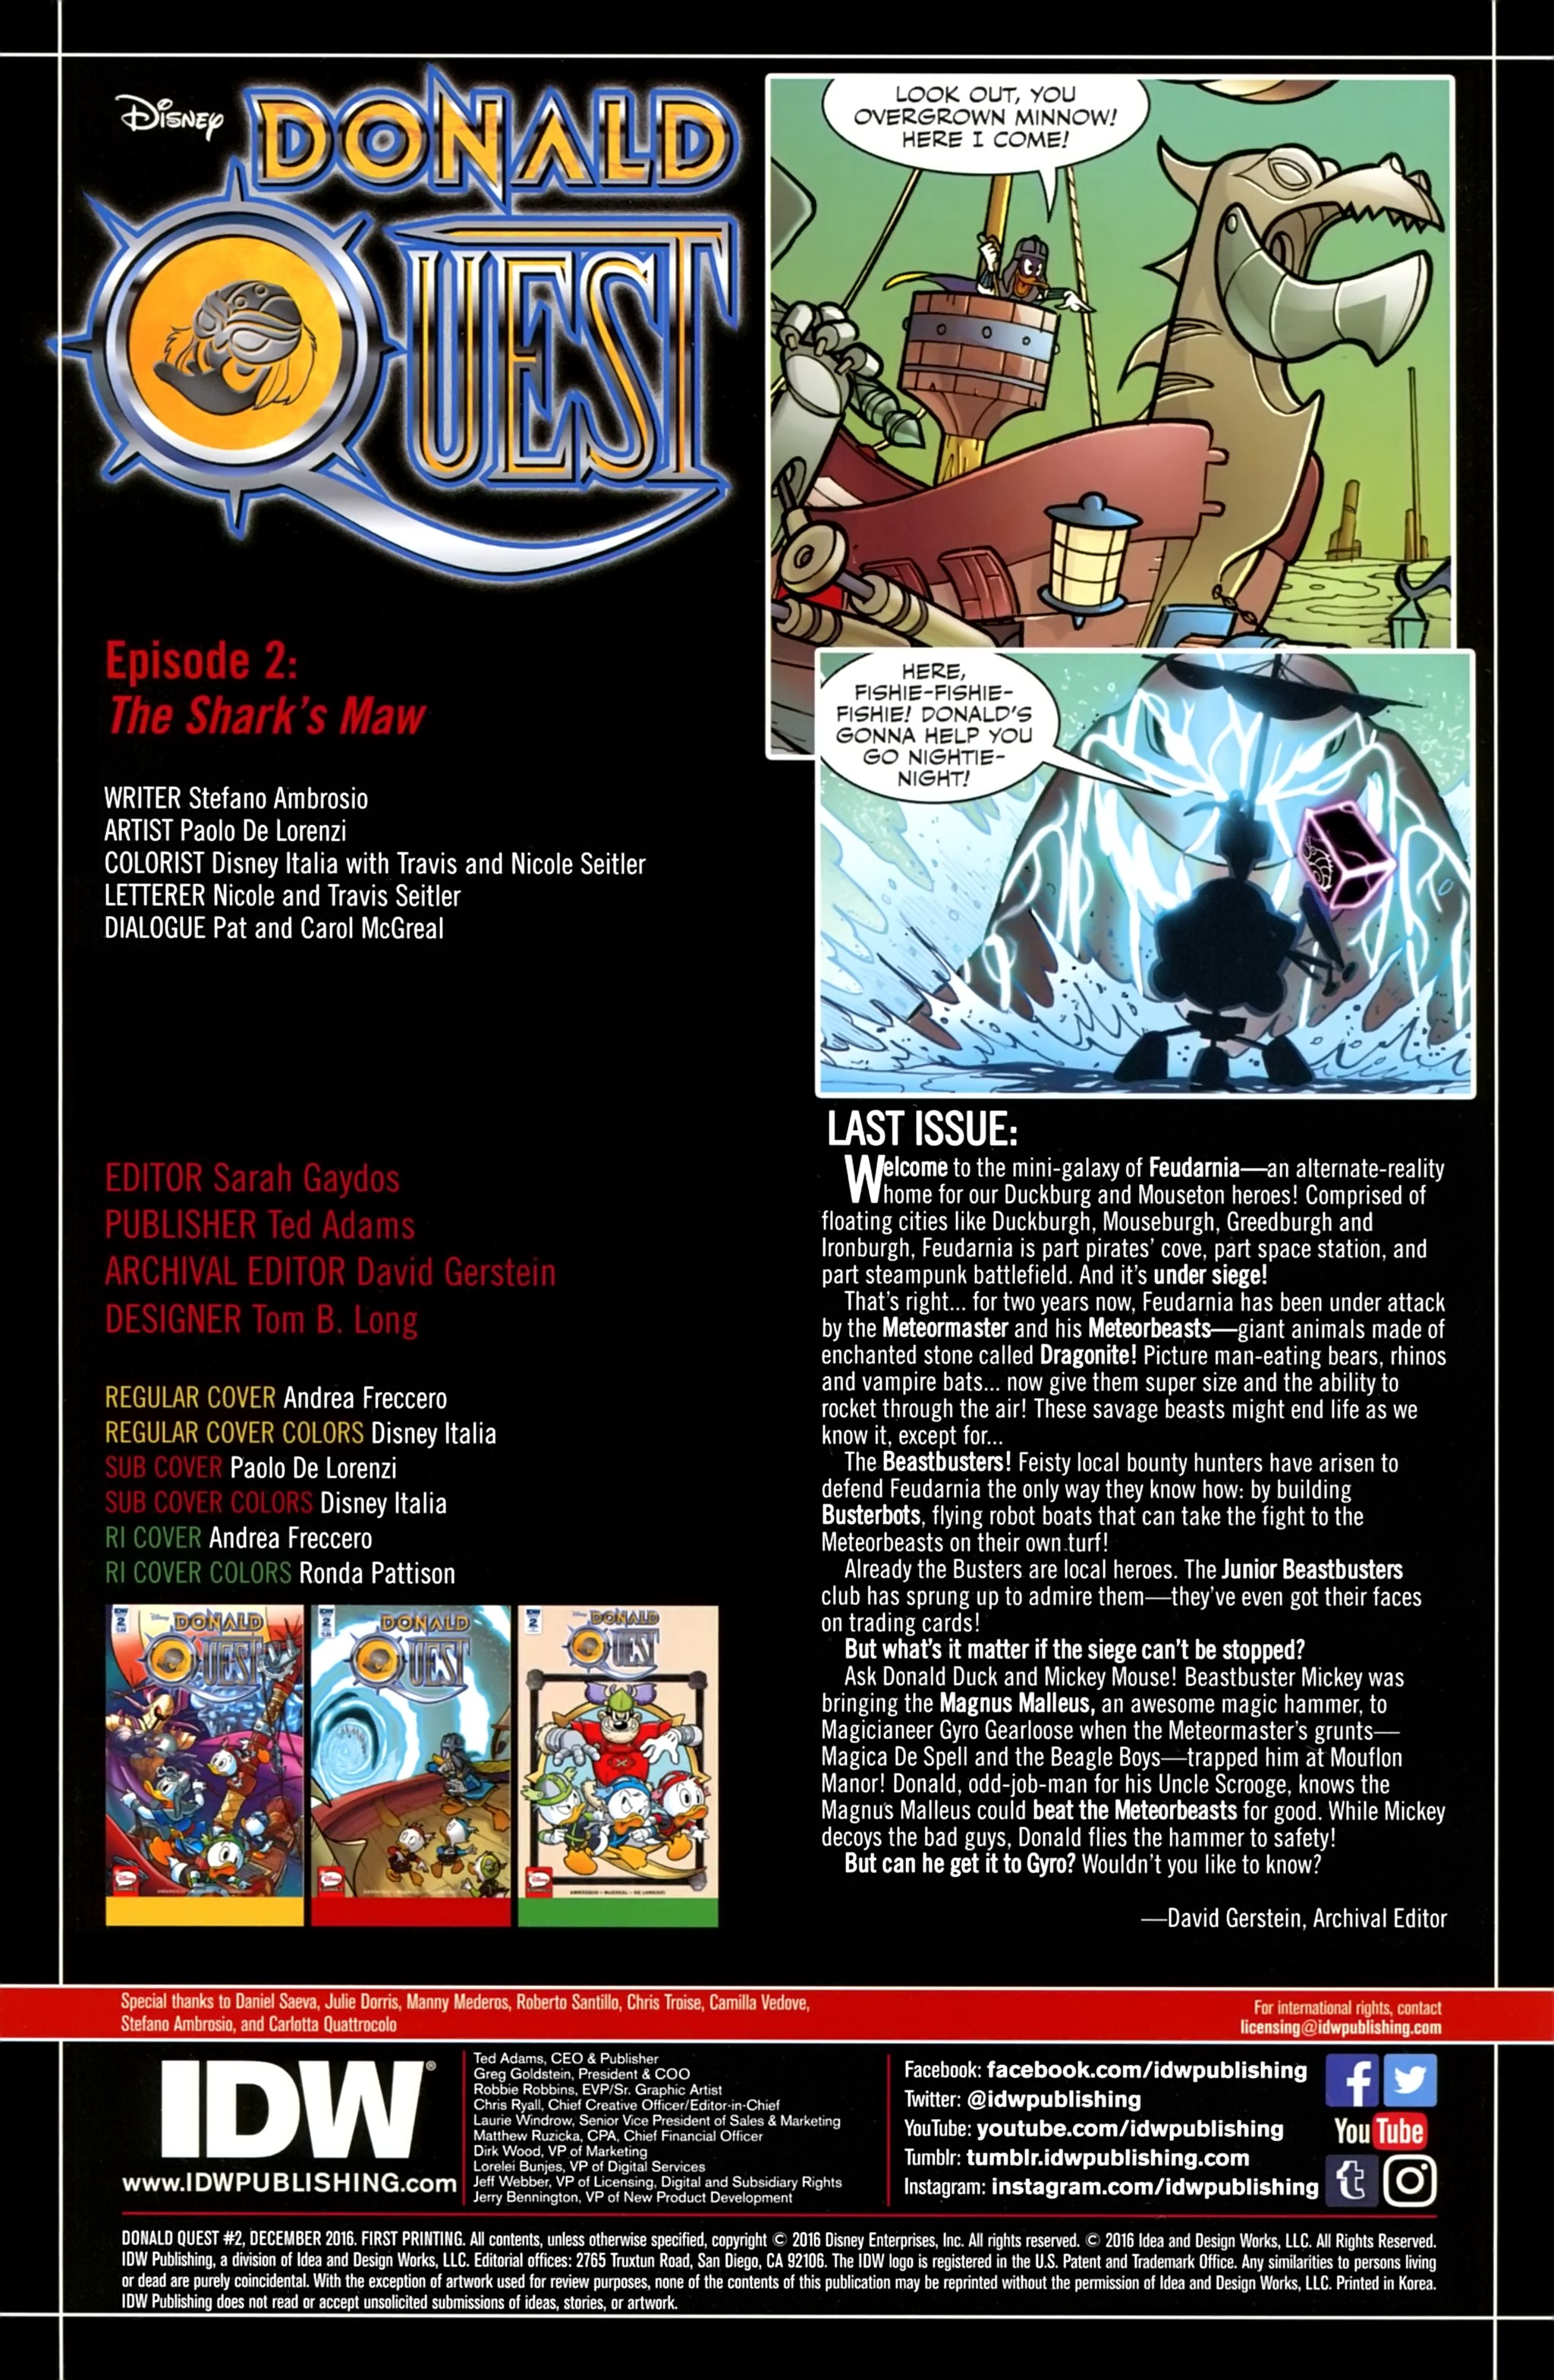 Read online Donald Quest comic -  Issue #2 - 2